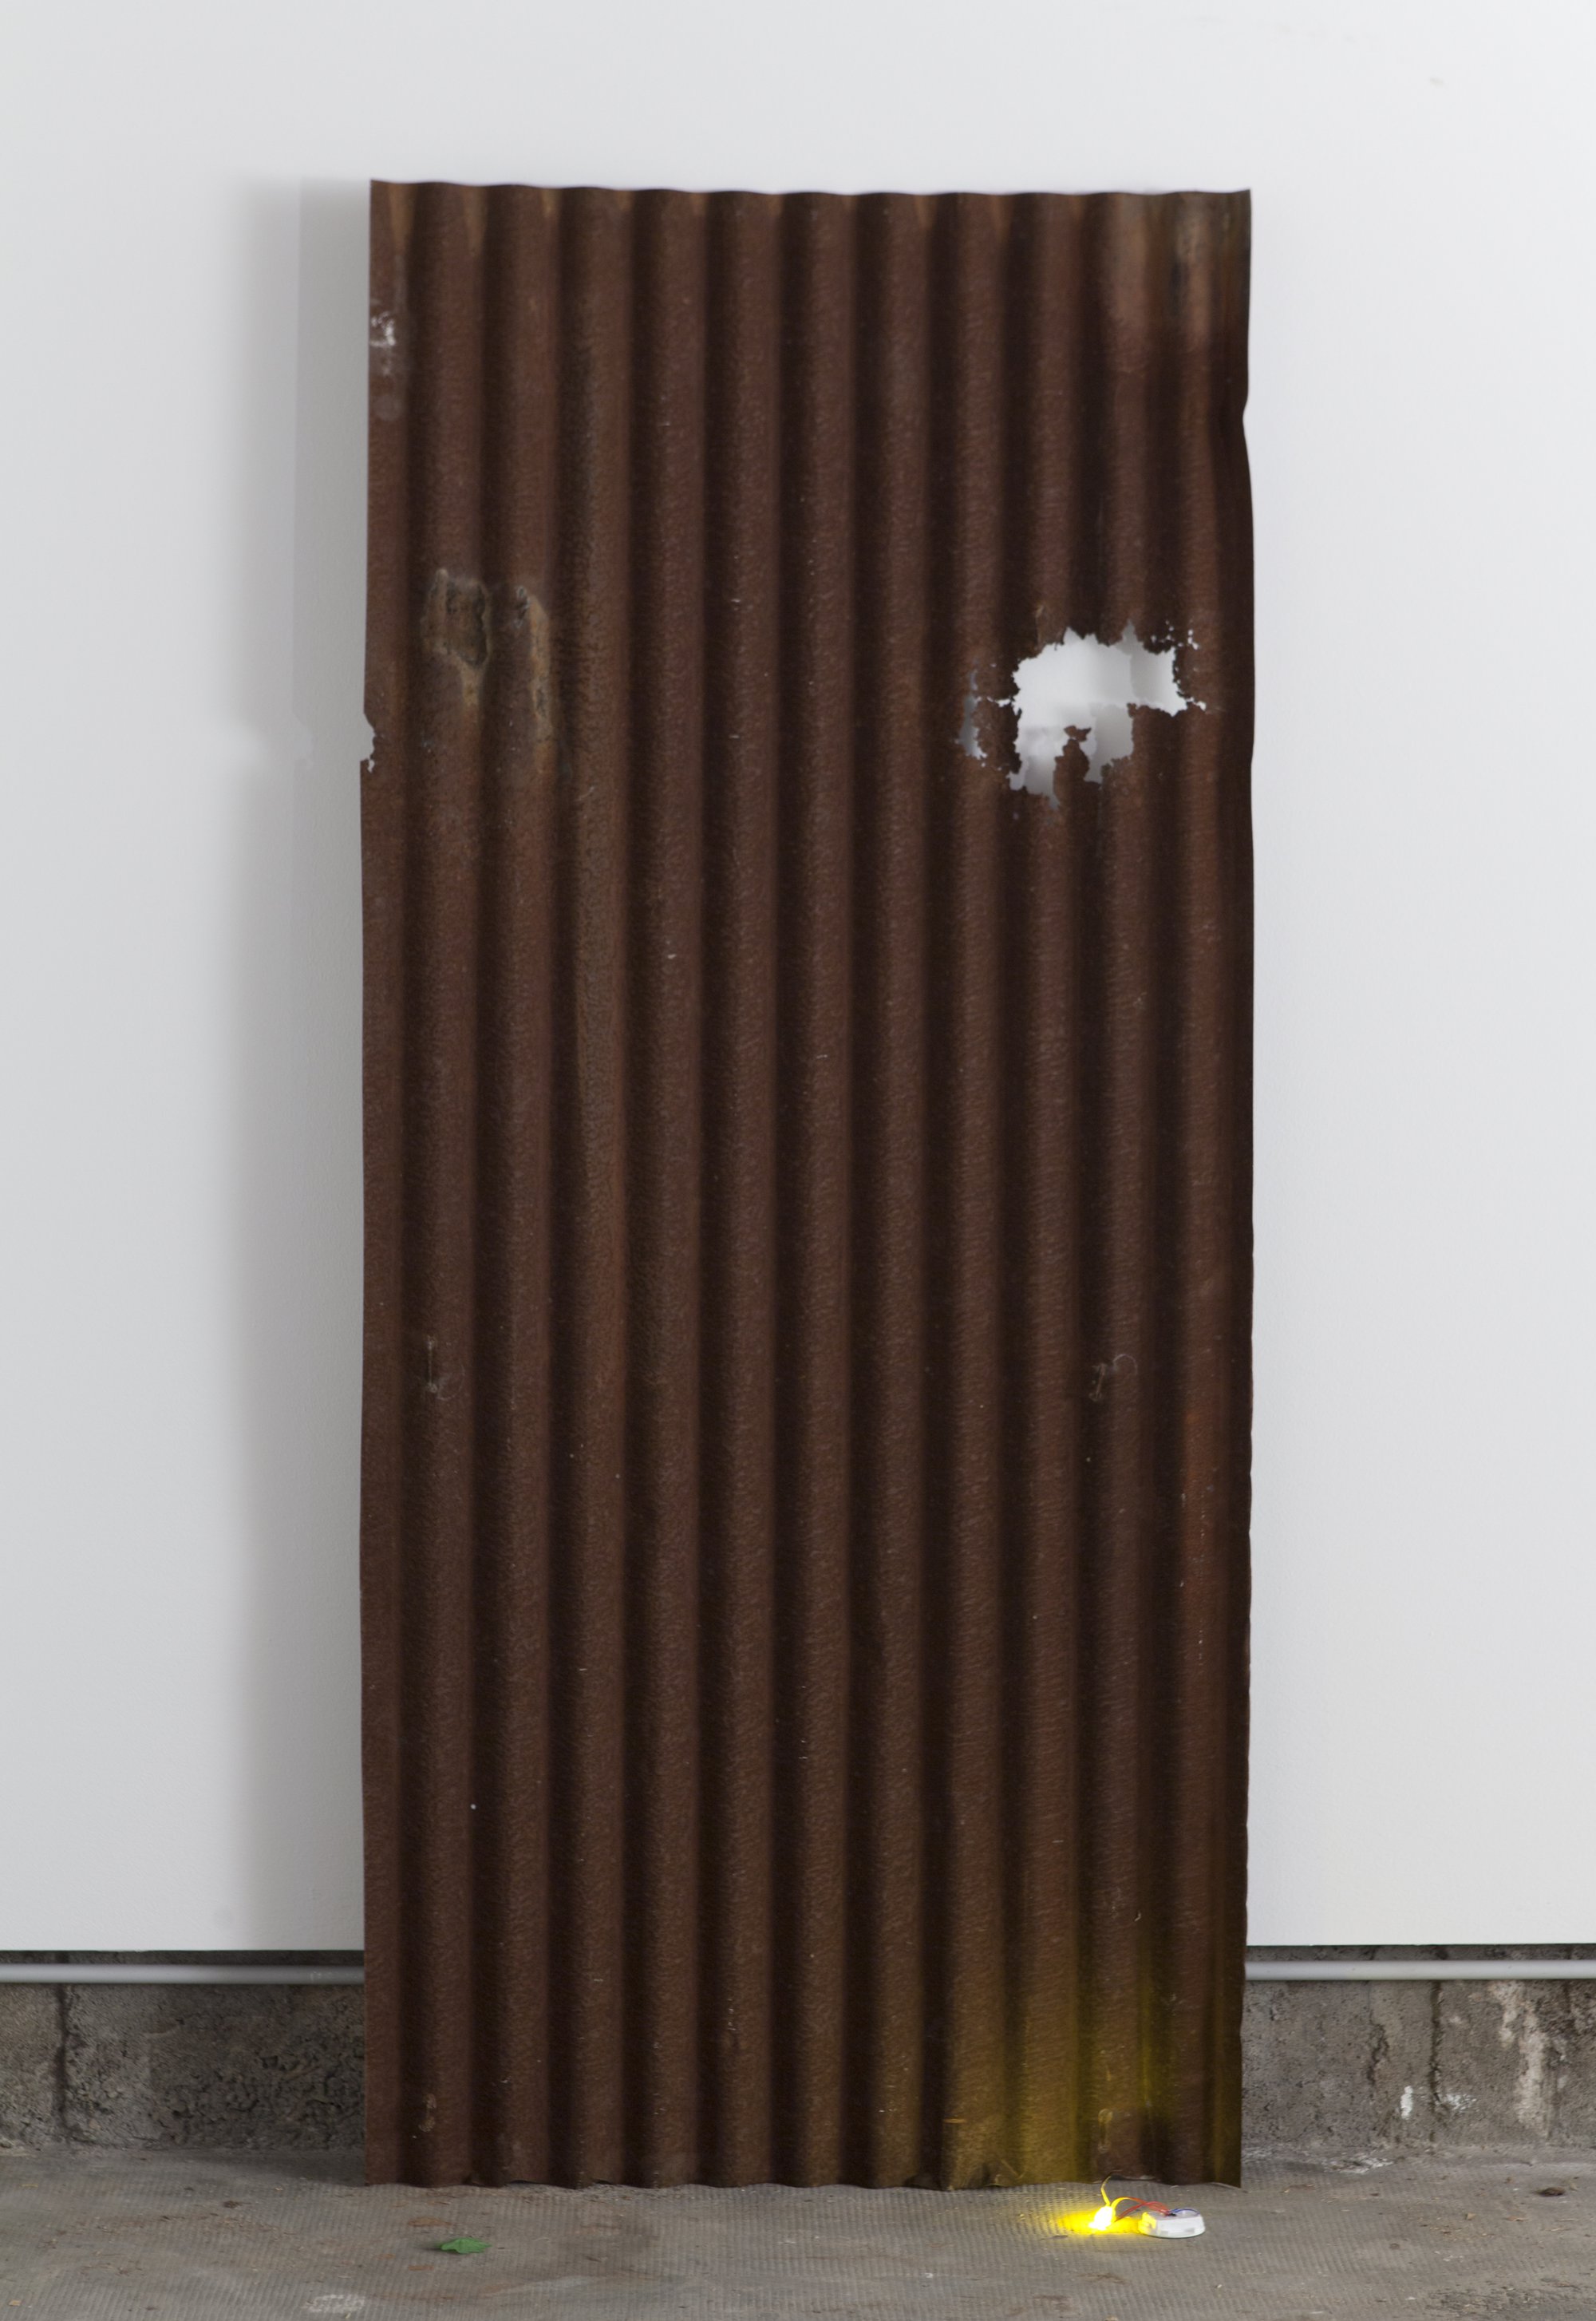 Ian Law, There Was A Body, I Was There, Was A Body, weathered corrugated steel, artificial candle electronics, 89 x 100 cm (35 x 39 1/3 in), 2014